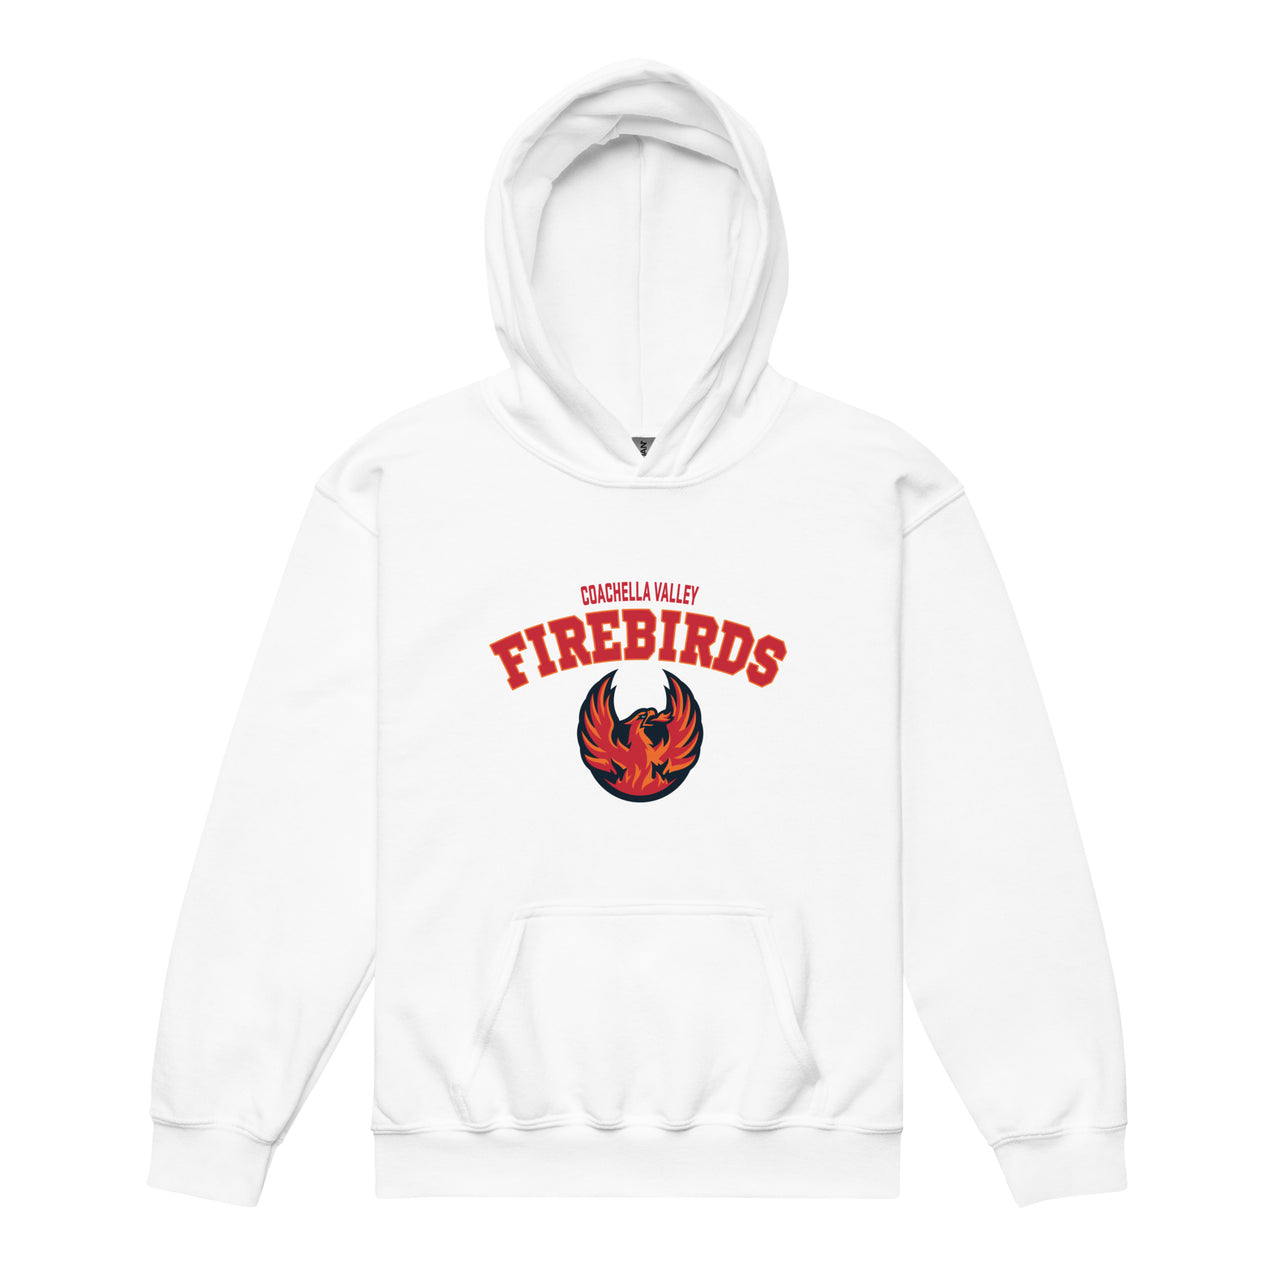 Coachella Valley Firebirds Youth Arch Pullover Hoodie